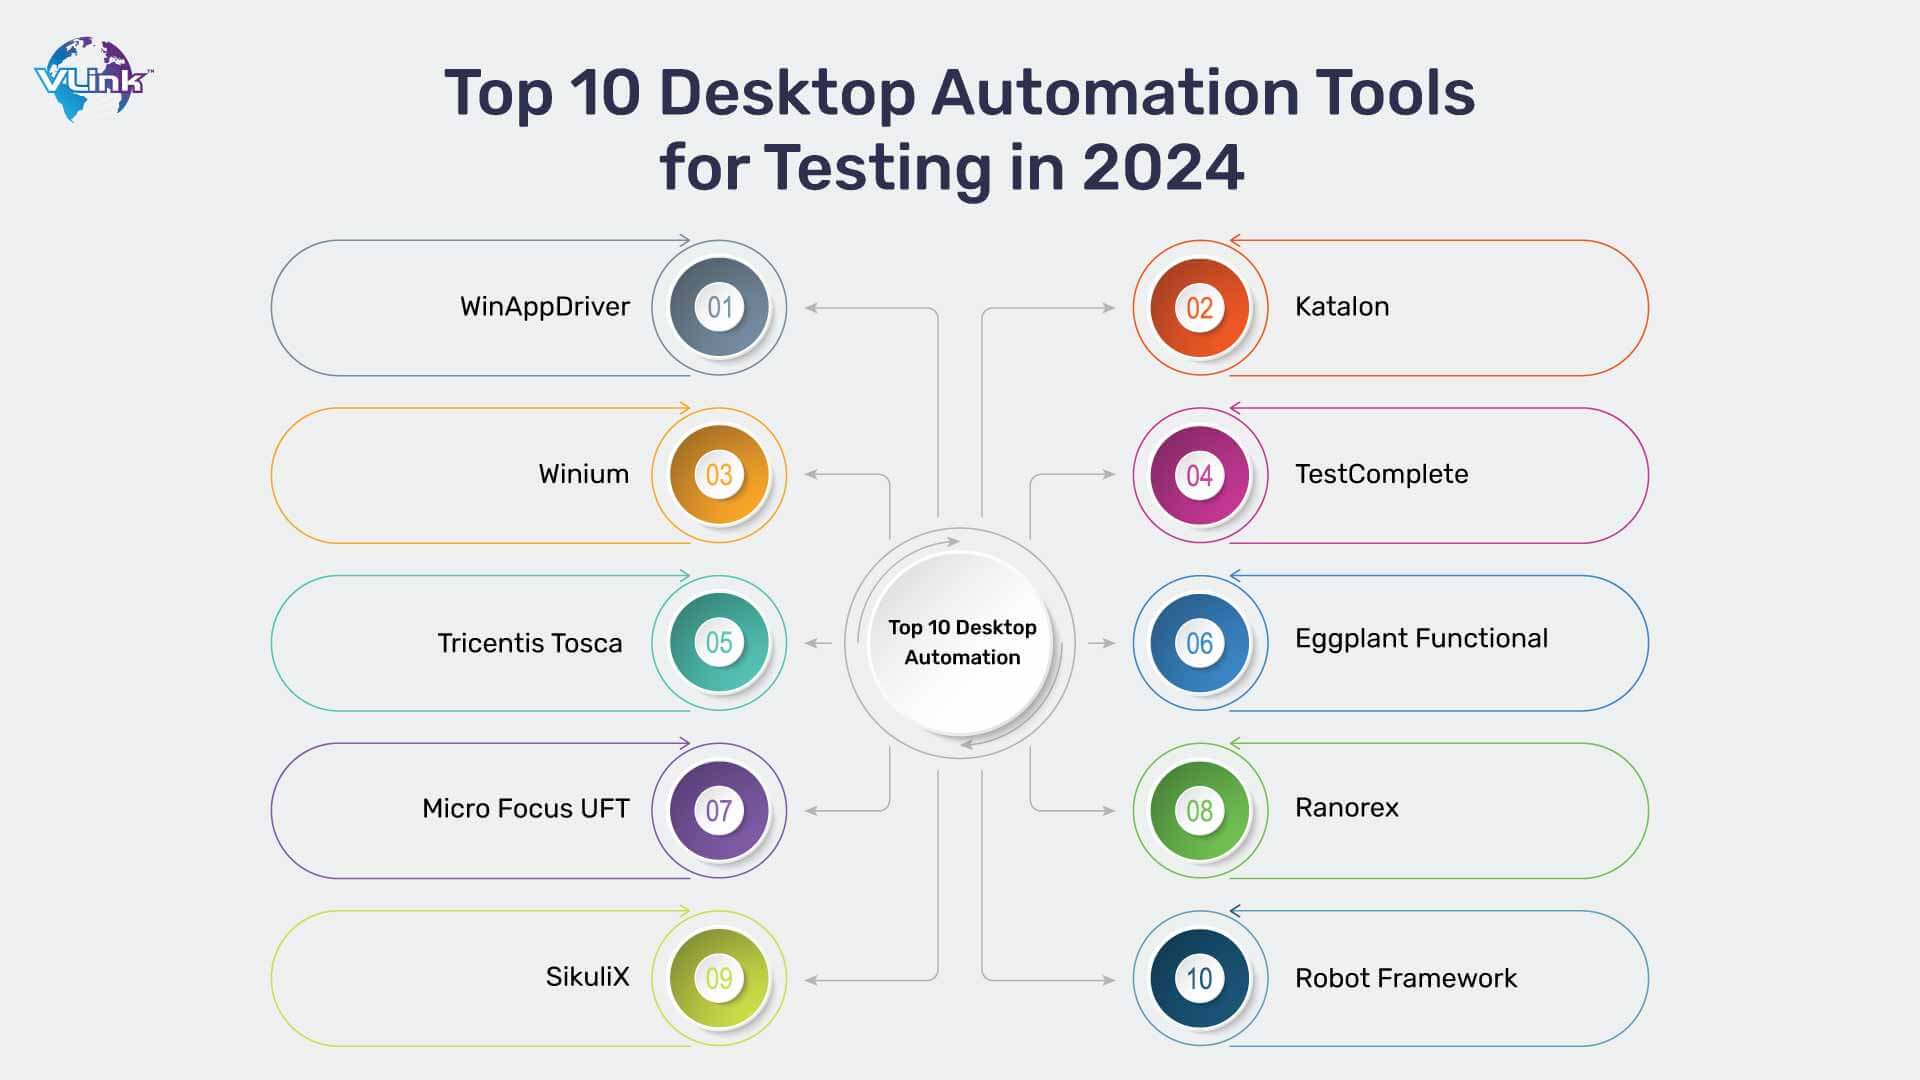 Top 10 Desktop Automation Tools for Testing in 2024